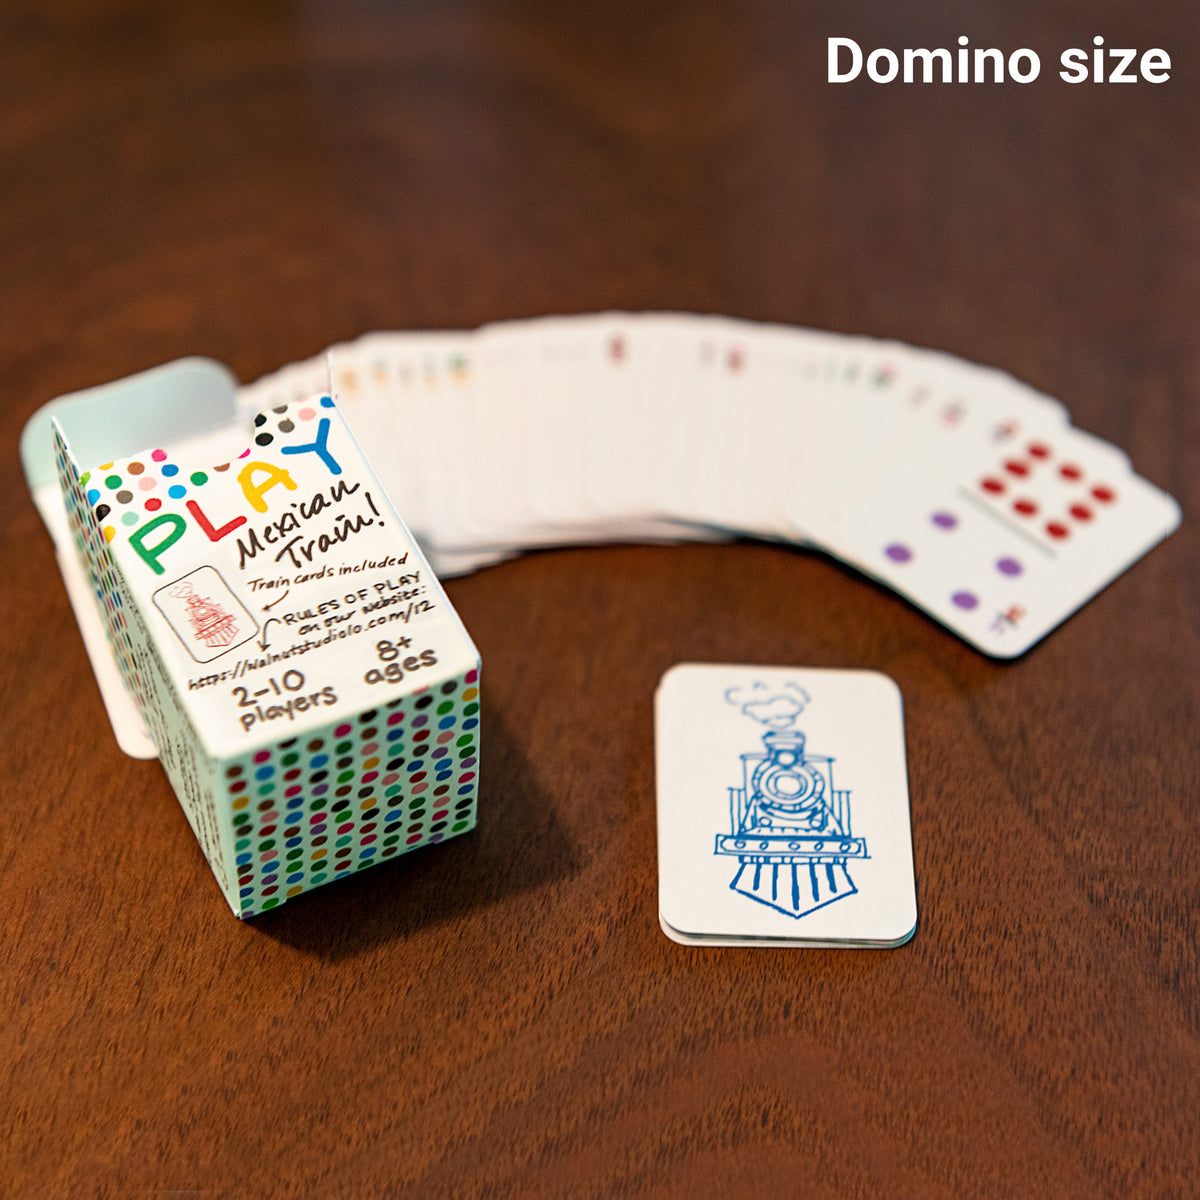 Close up of the box of domino-sized playing cards of double 12 dominoes . It is on the table in sharp focus along with a card showing a train for the Mexican Train game and the rest of the cards are fanned out in the background , blurred out.